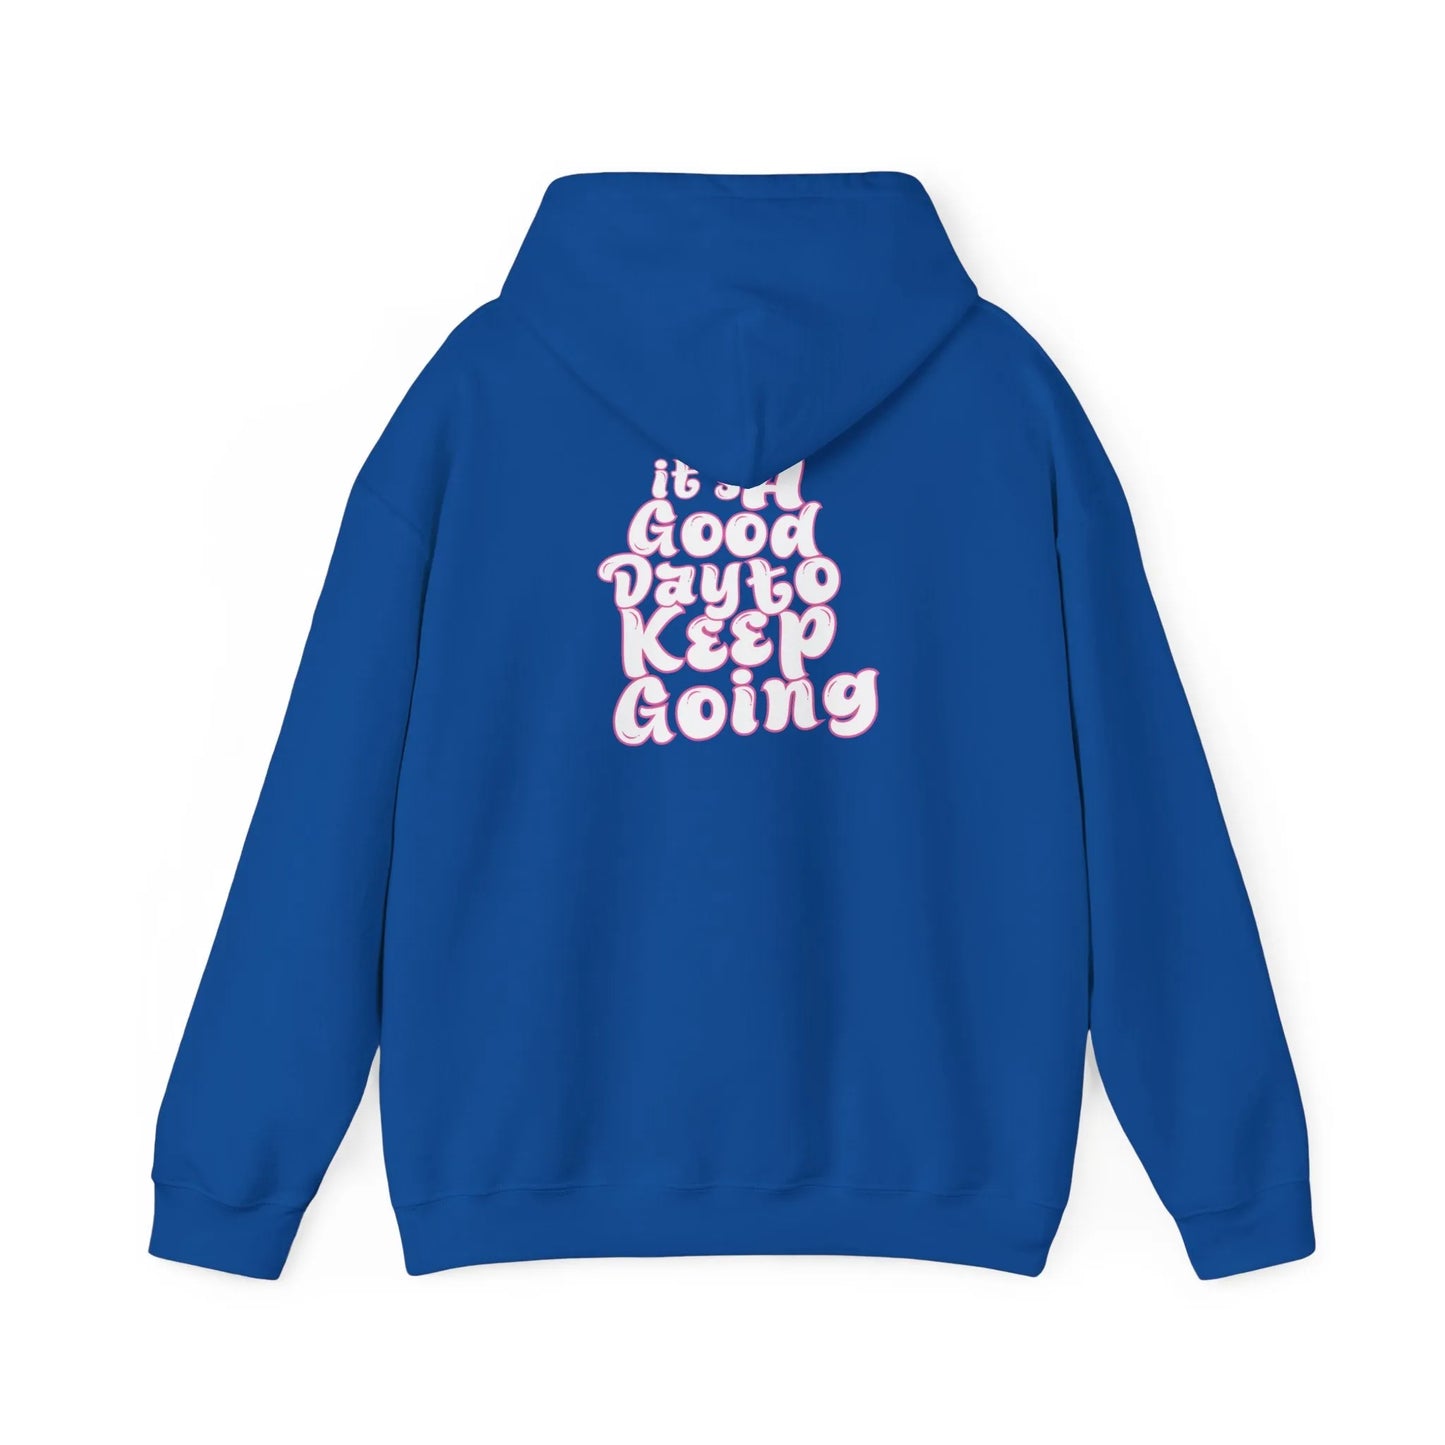 It's A Good Day To Keep Going Hoodie Pink Royal Black